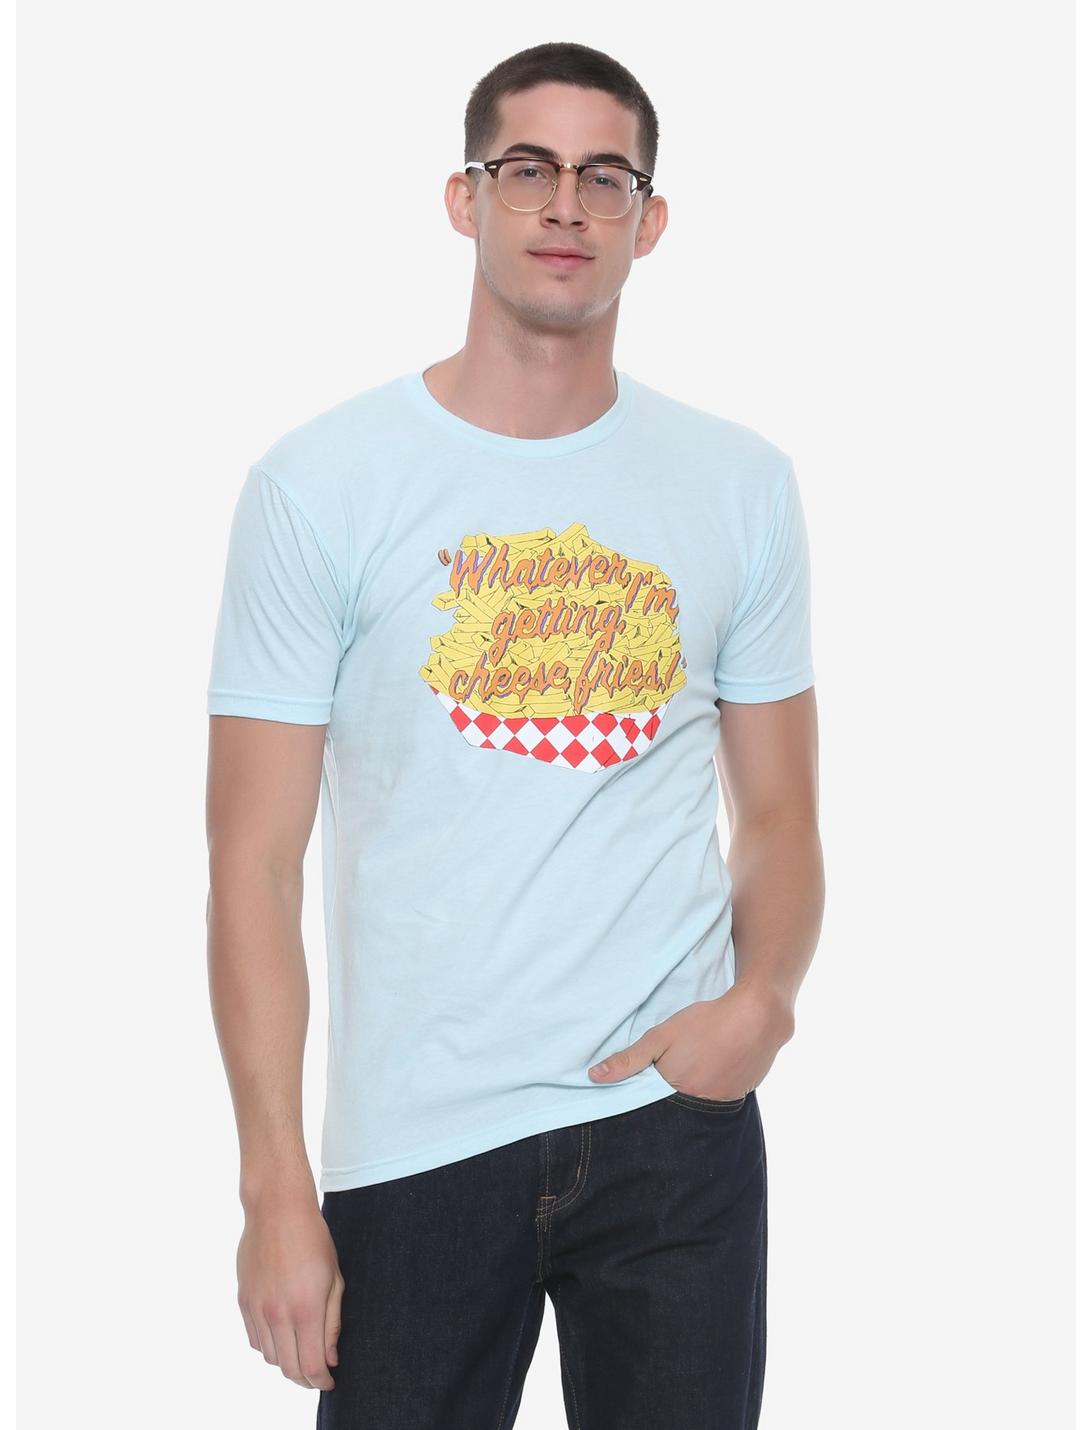 Mean Girls Cheese Fries T-Shirt - BoxLunch Exclusive, BLUE, hi-res